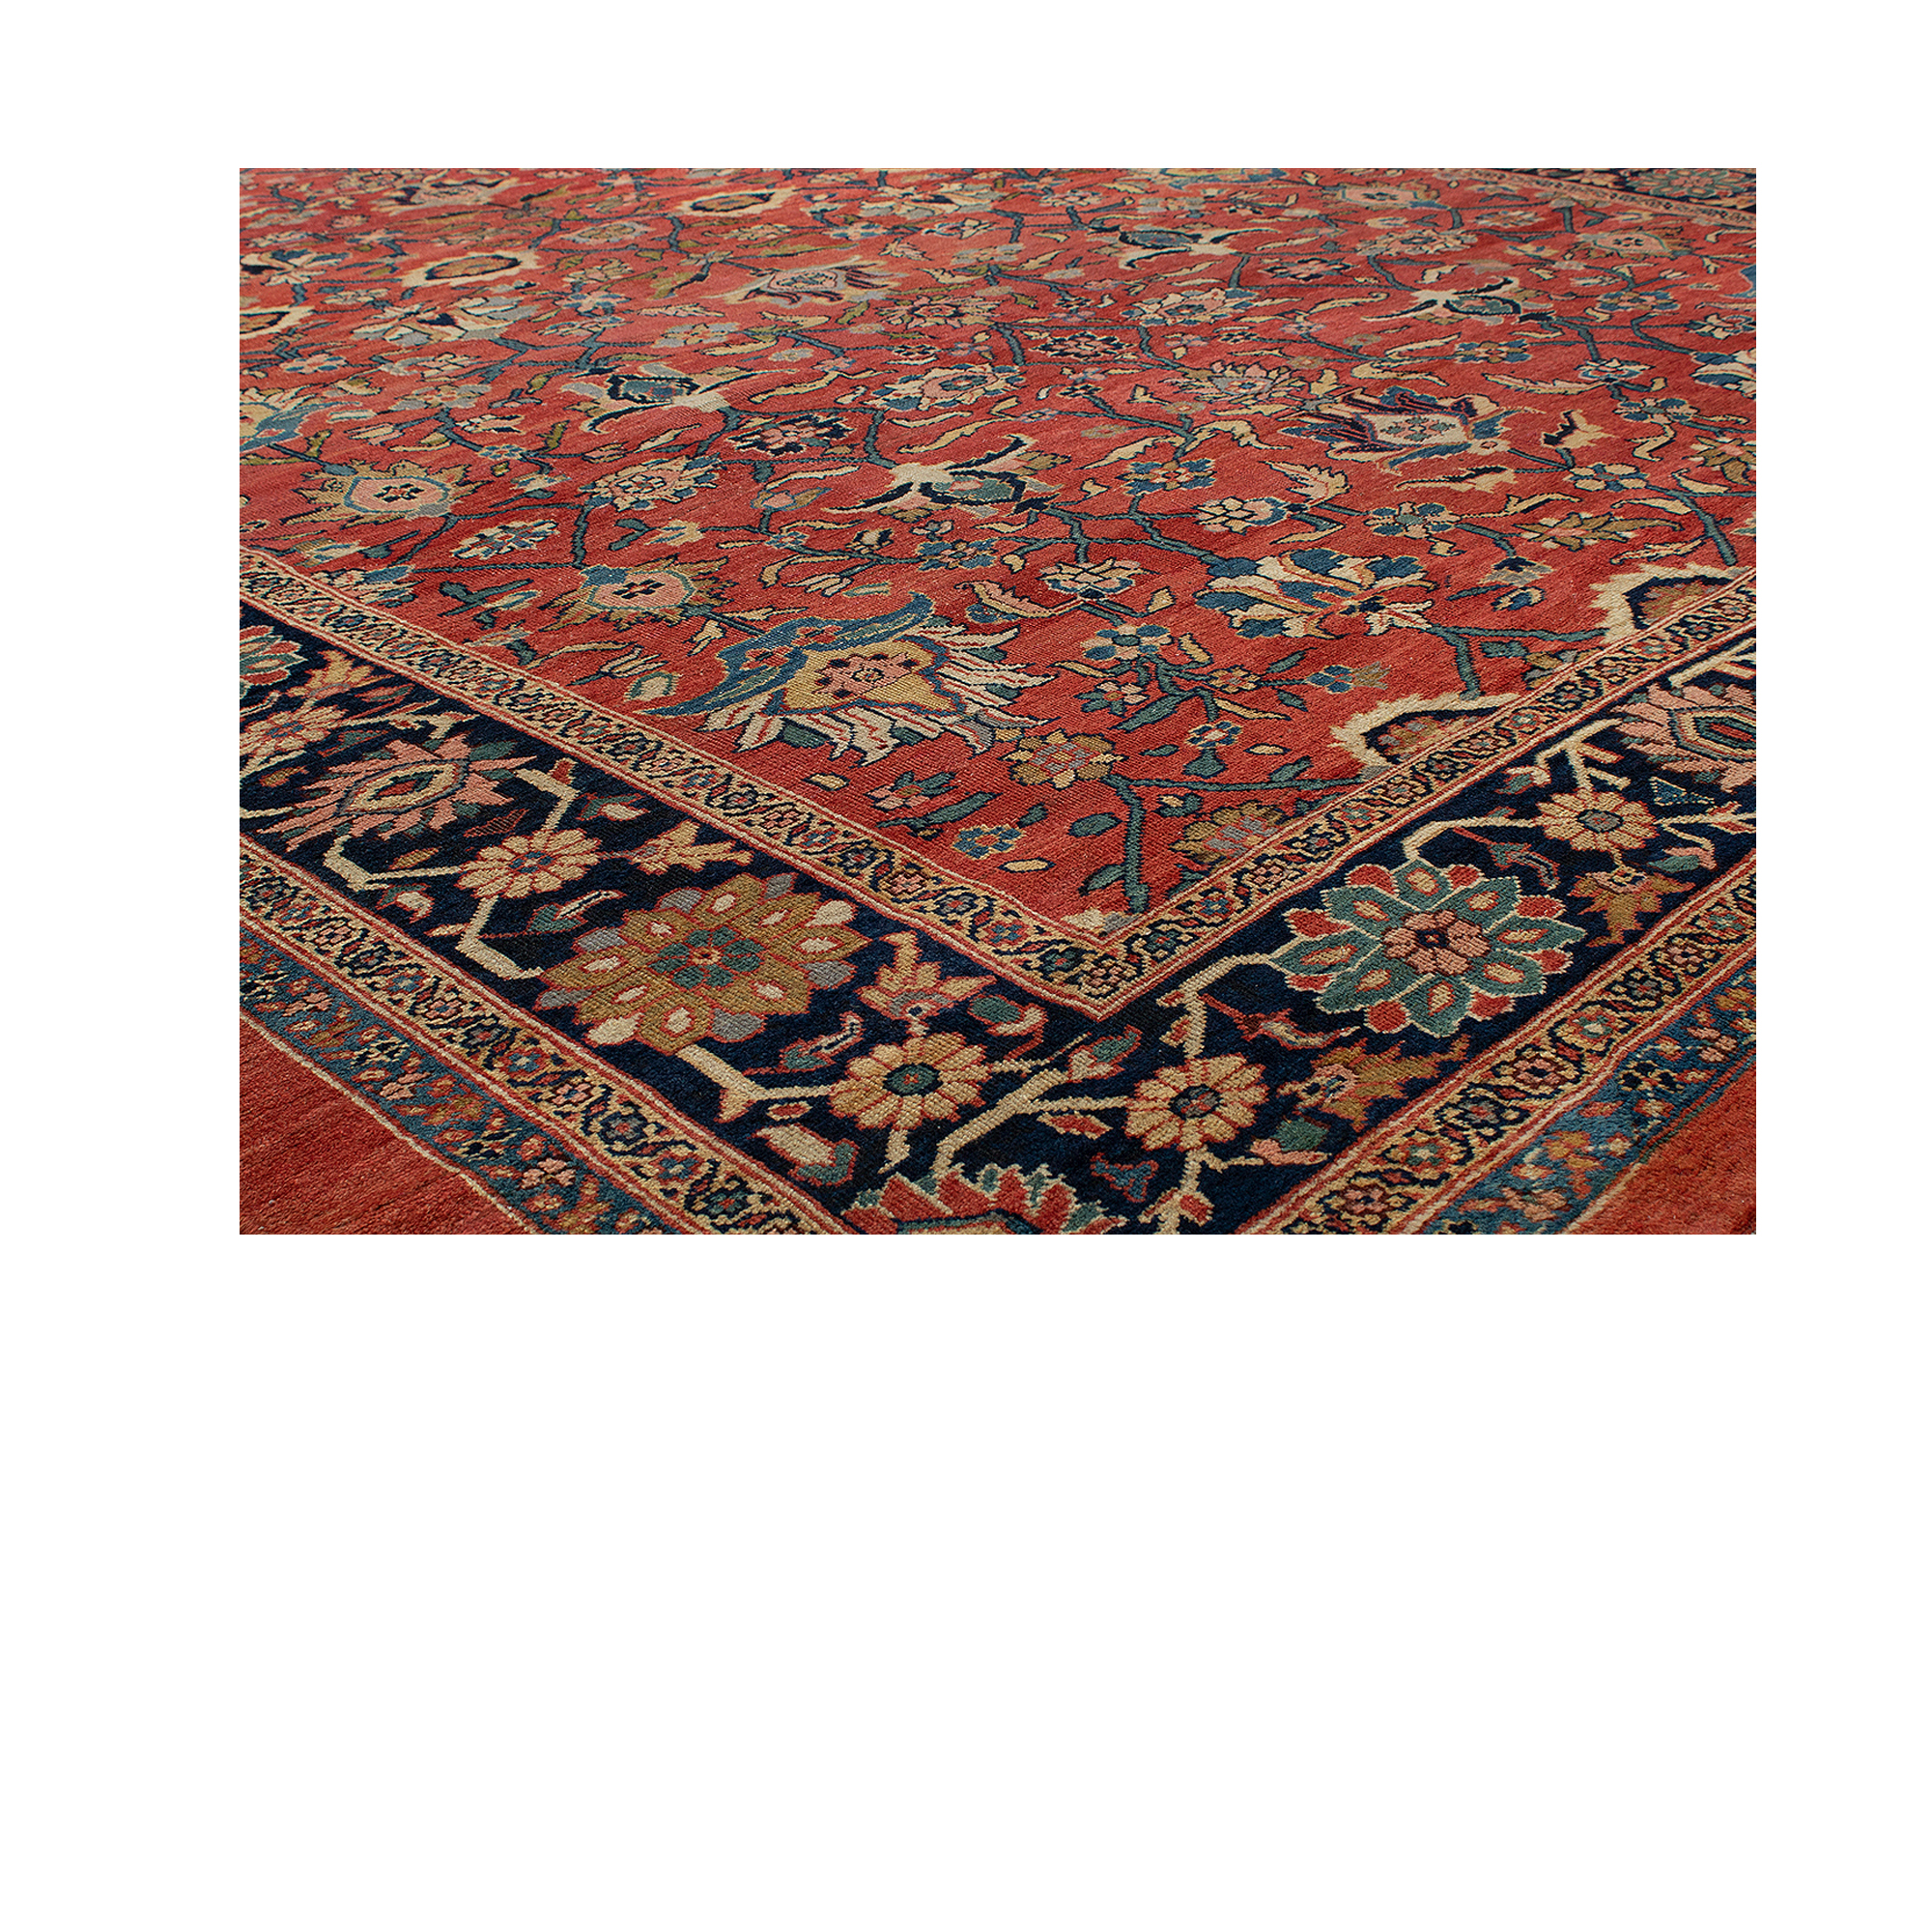 This Persian Mahal rugs is from major rug weaving area in central west Iran.